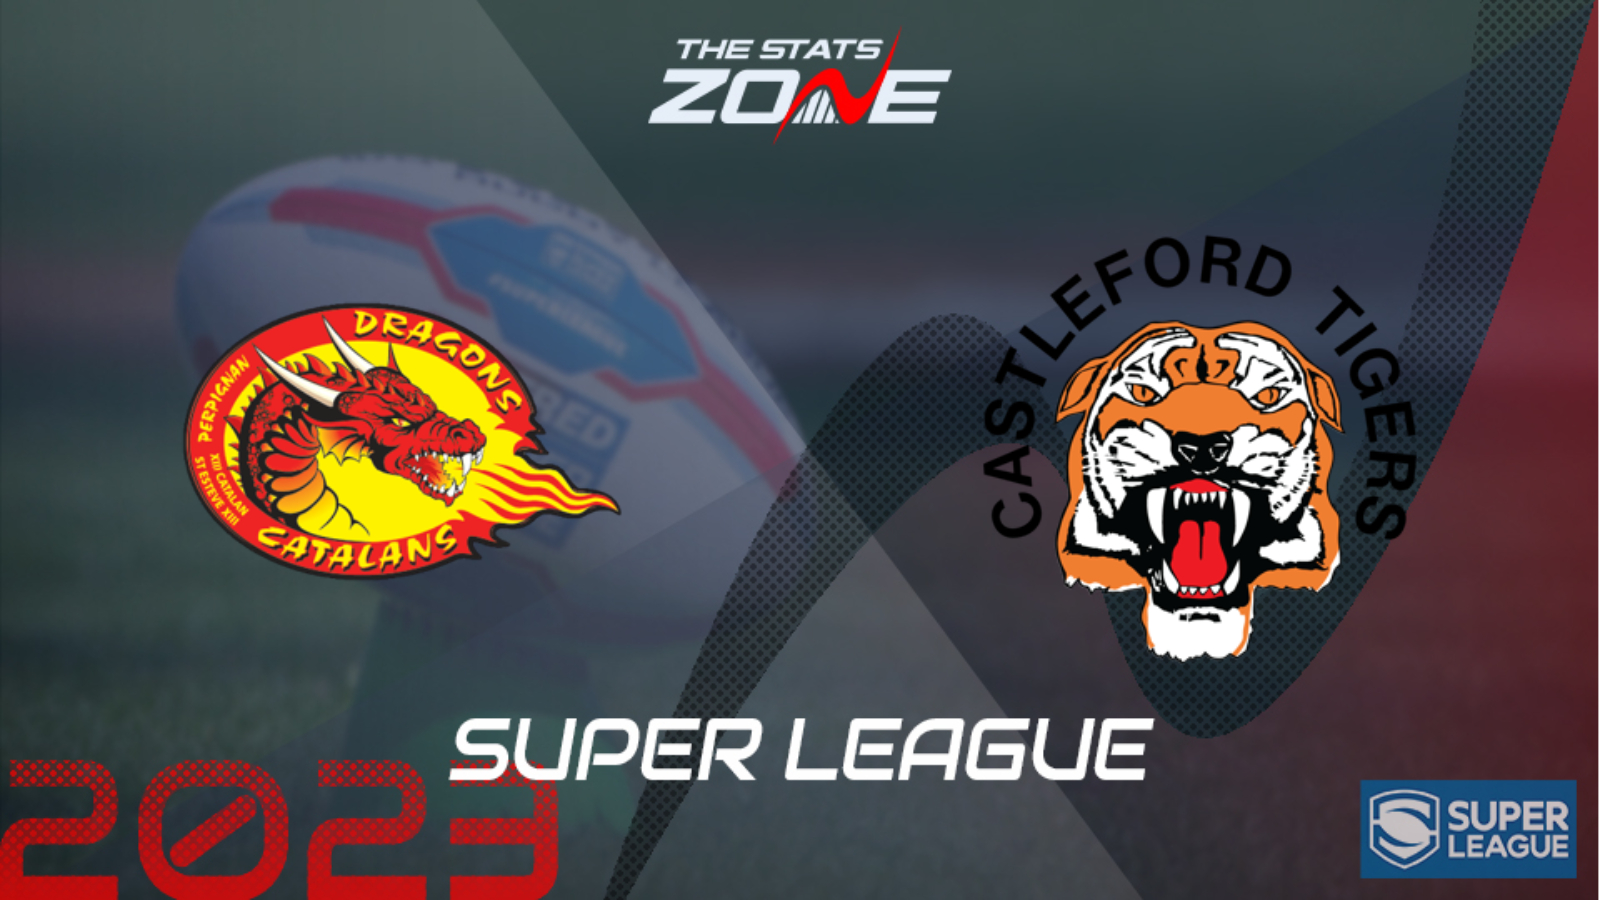 Catalans Dragons vs Castleford Tigers – League Stage